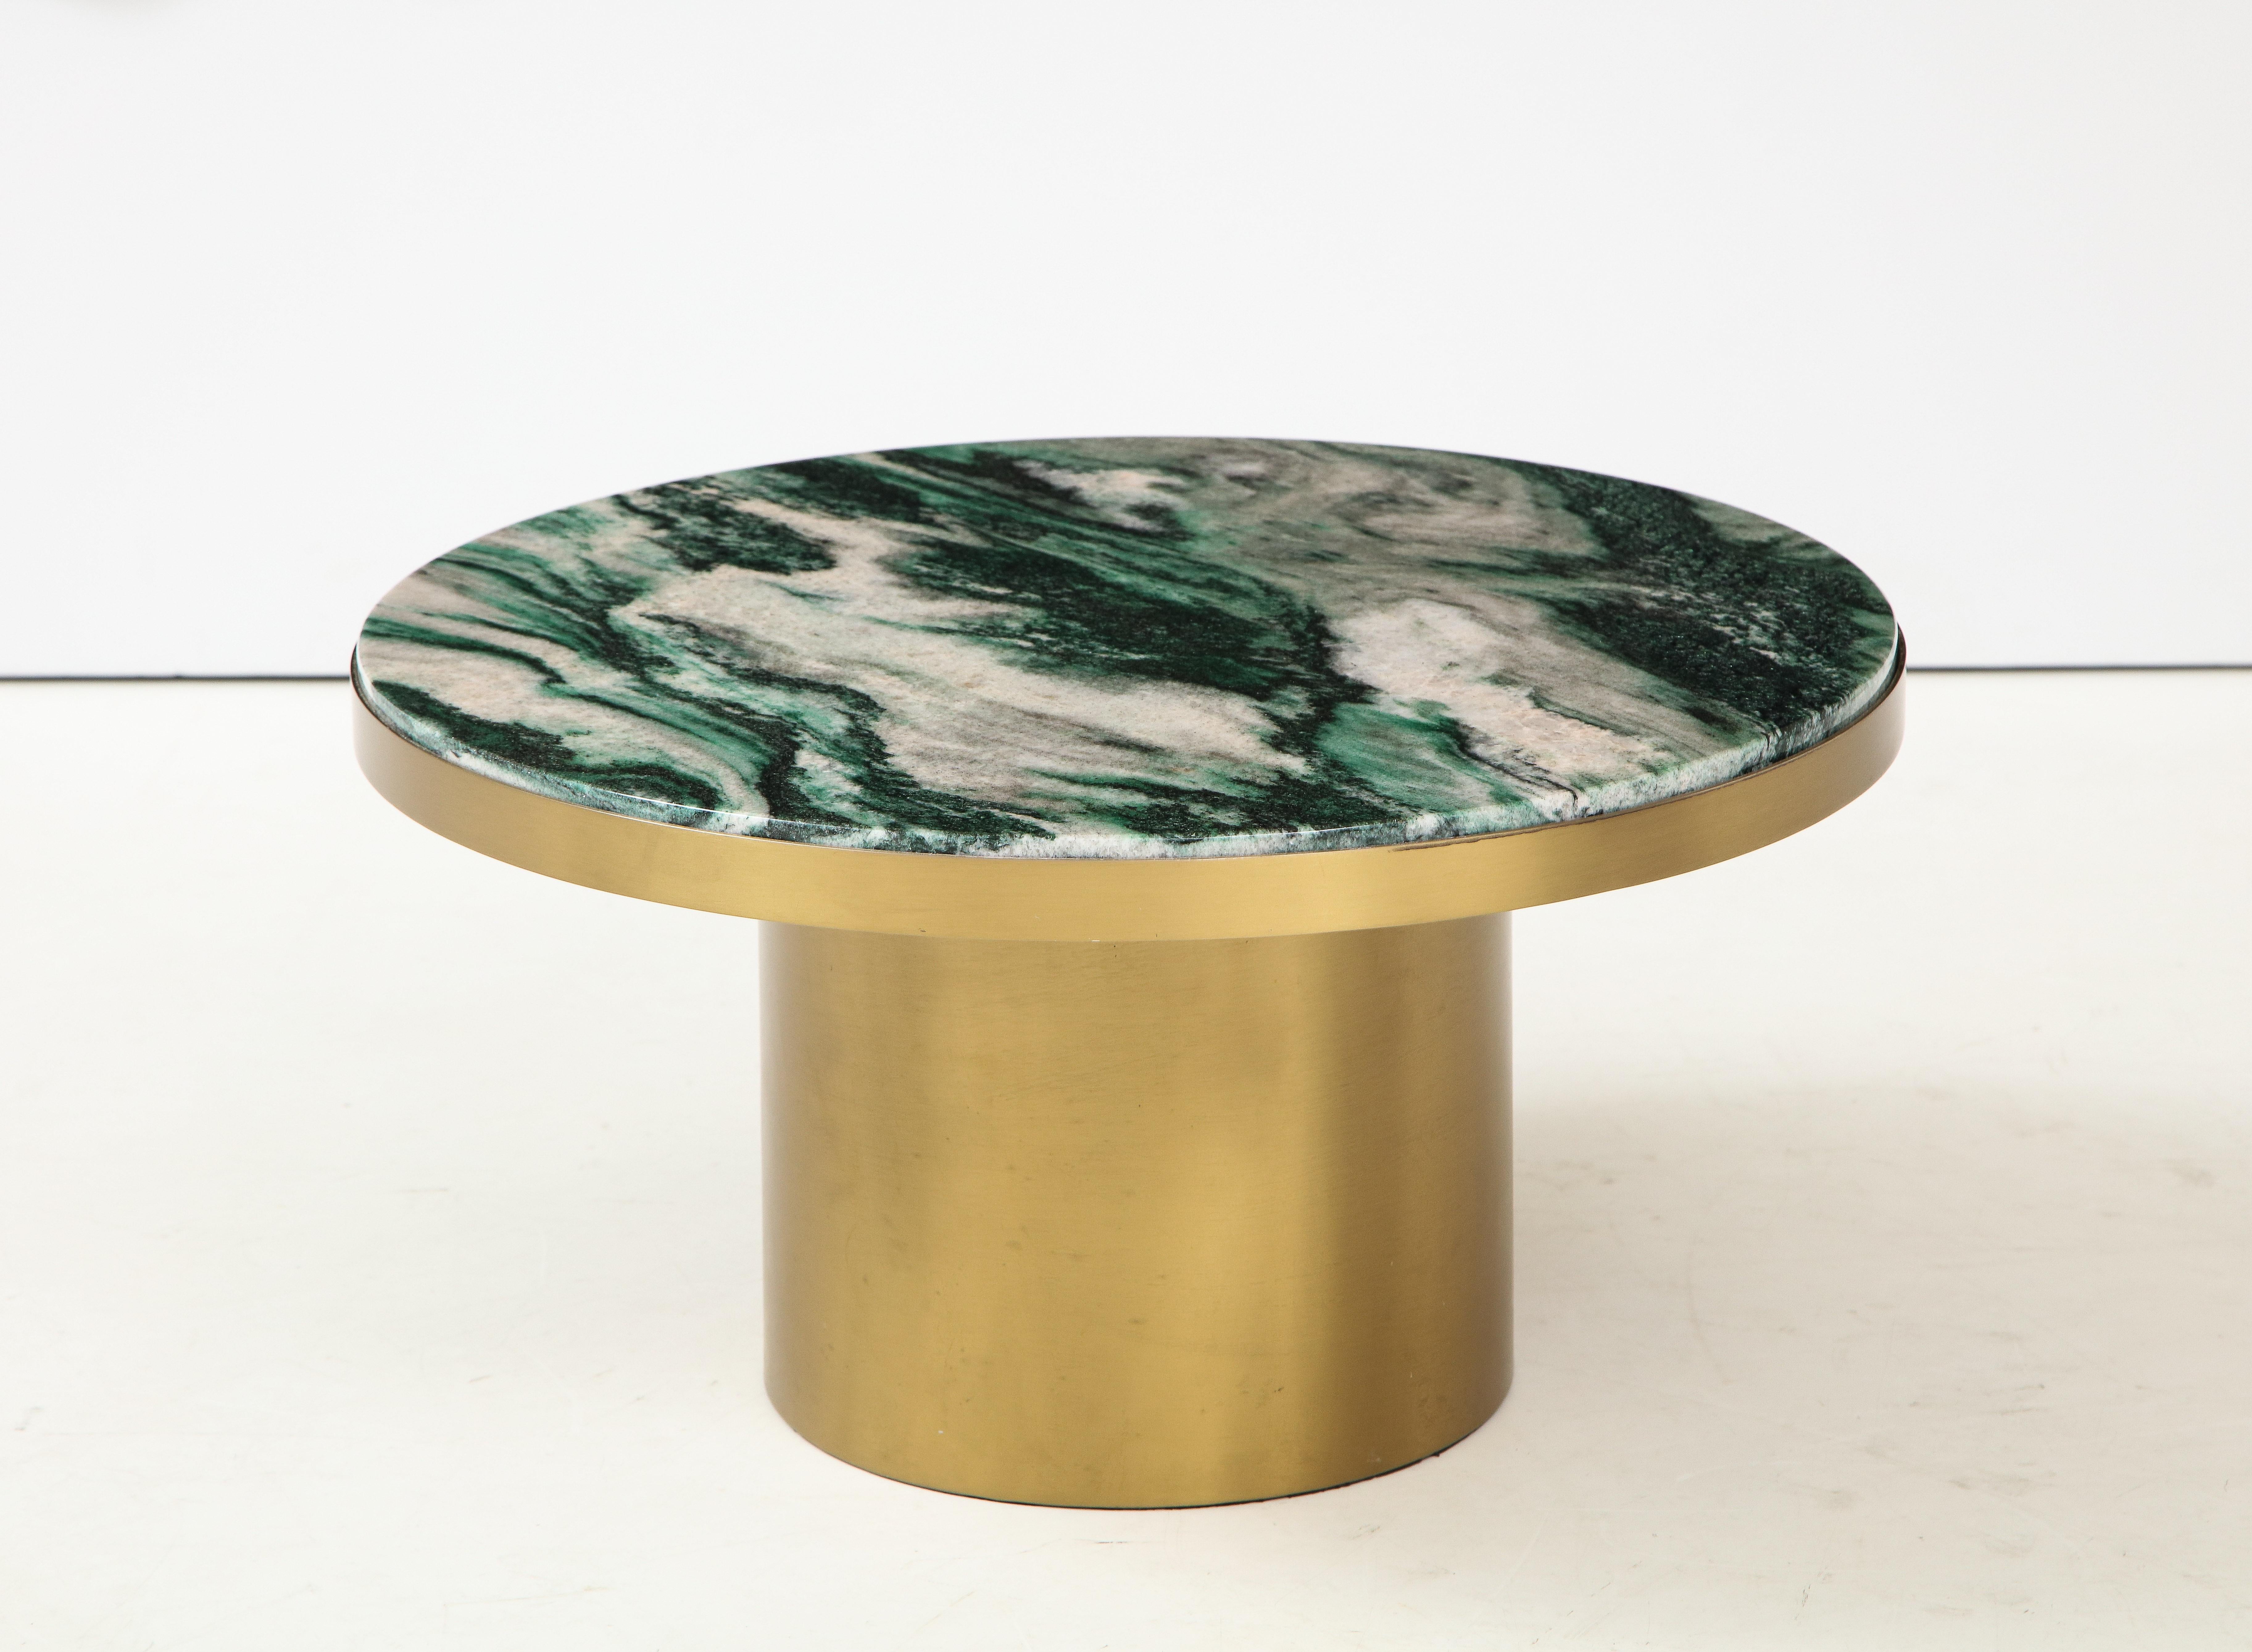 Low cocktail / coffee table with a beautiful piece of polished
Polar verde marble that sits on top of a brass base.